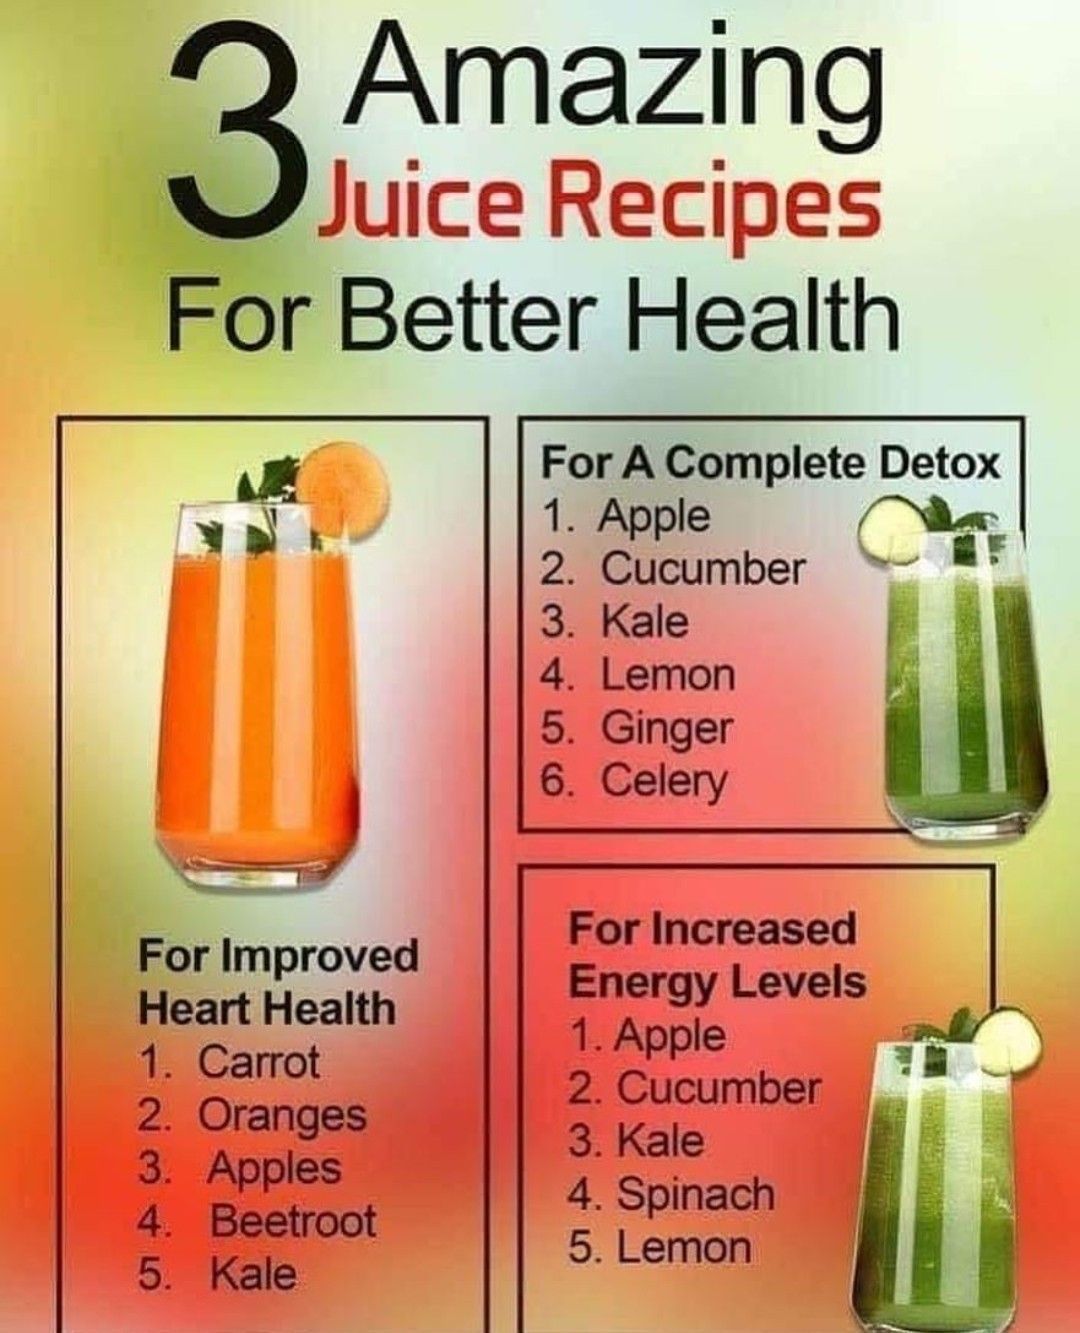 Rapid Weight Loss Juicing Fasting Recipes: Fasting, Detox, Juice Cleanse Recipes -   16 diet Juice health ideas